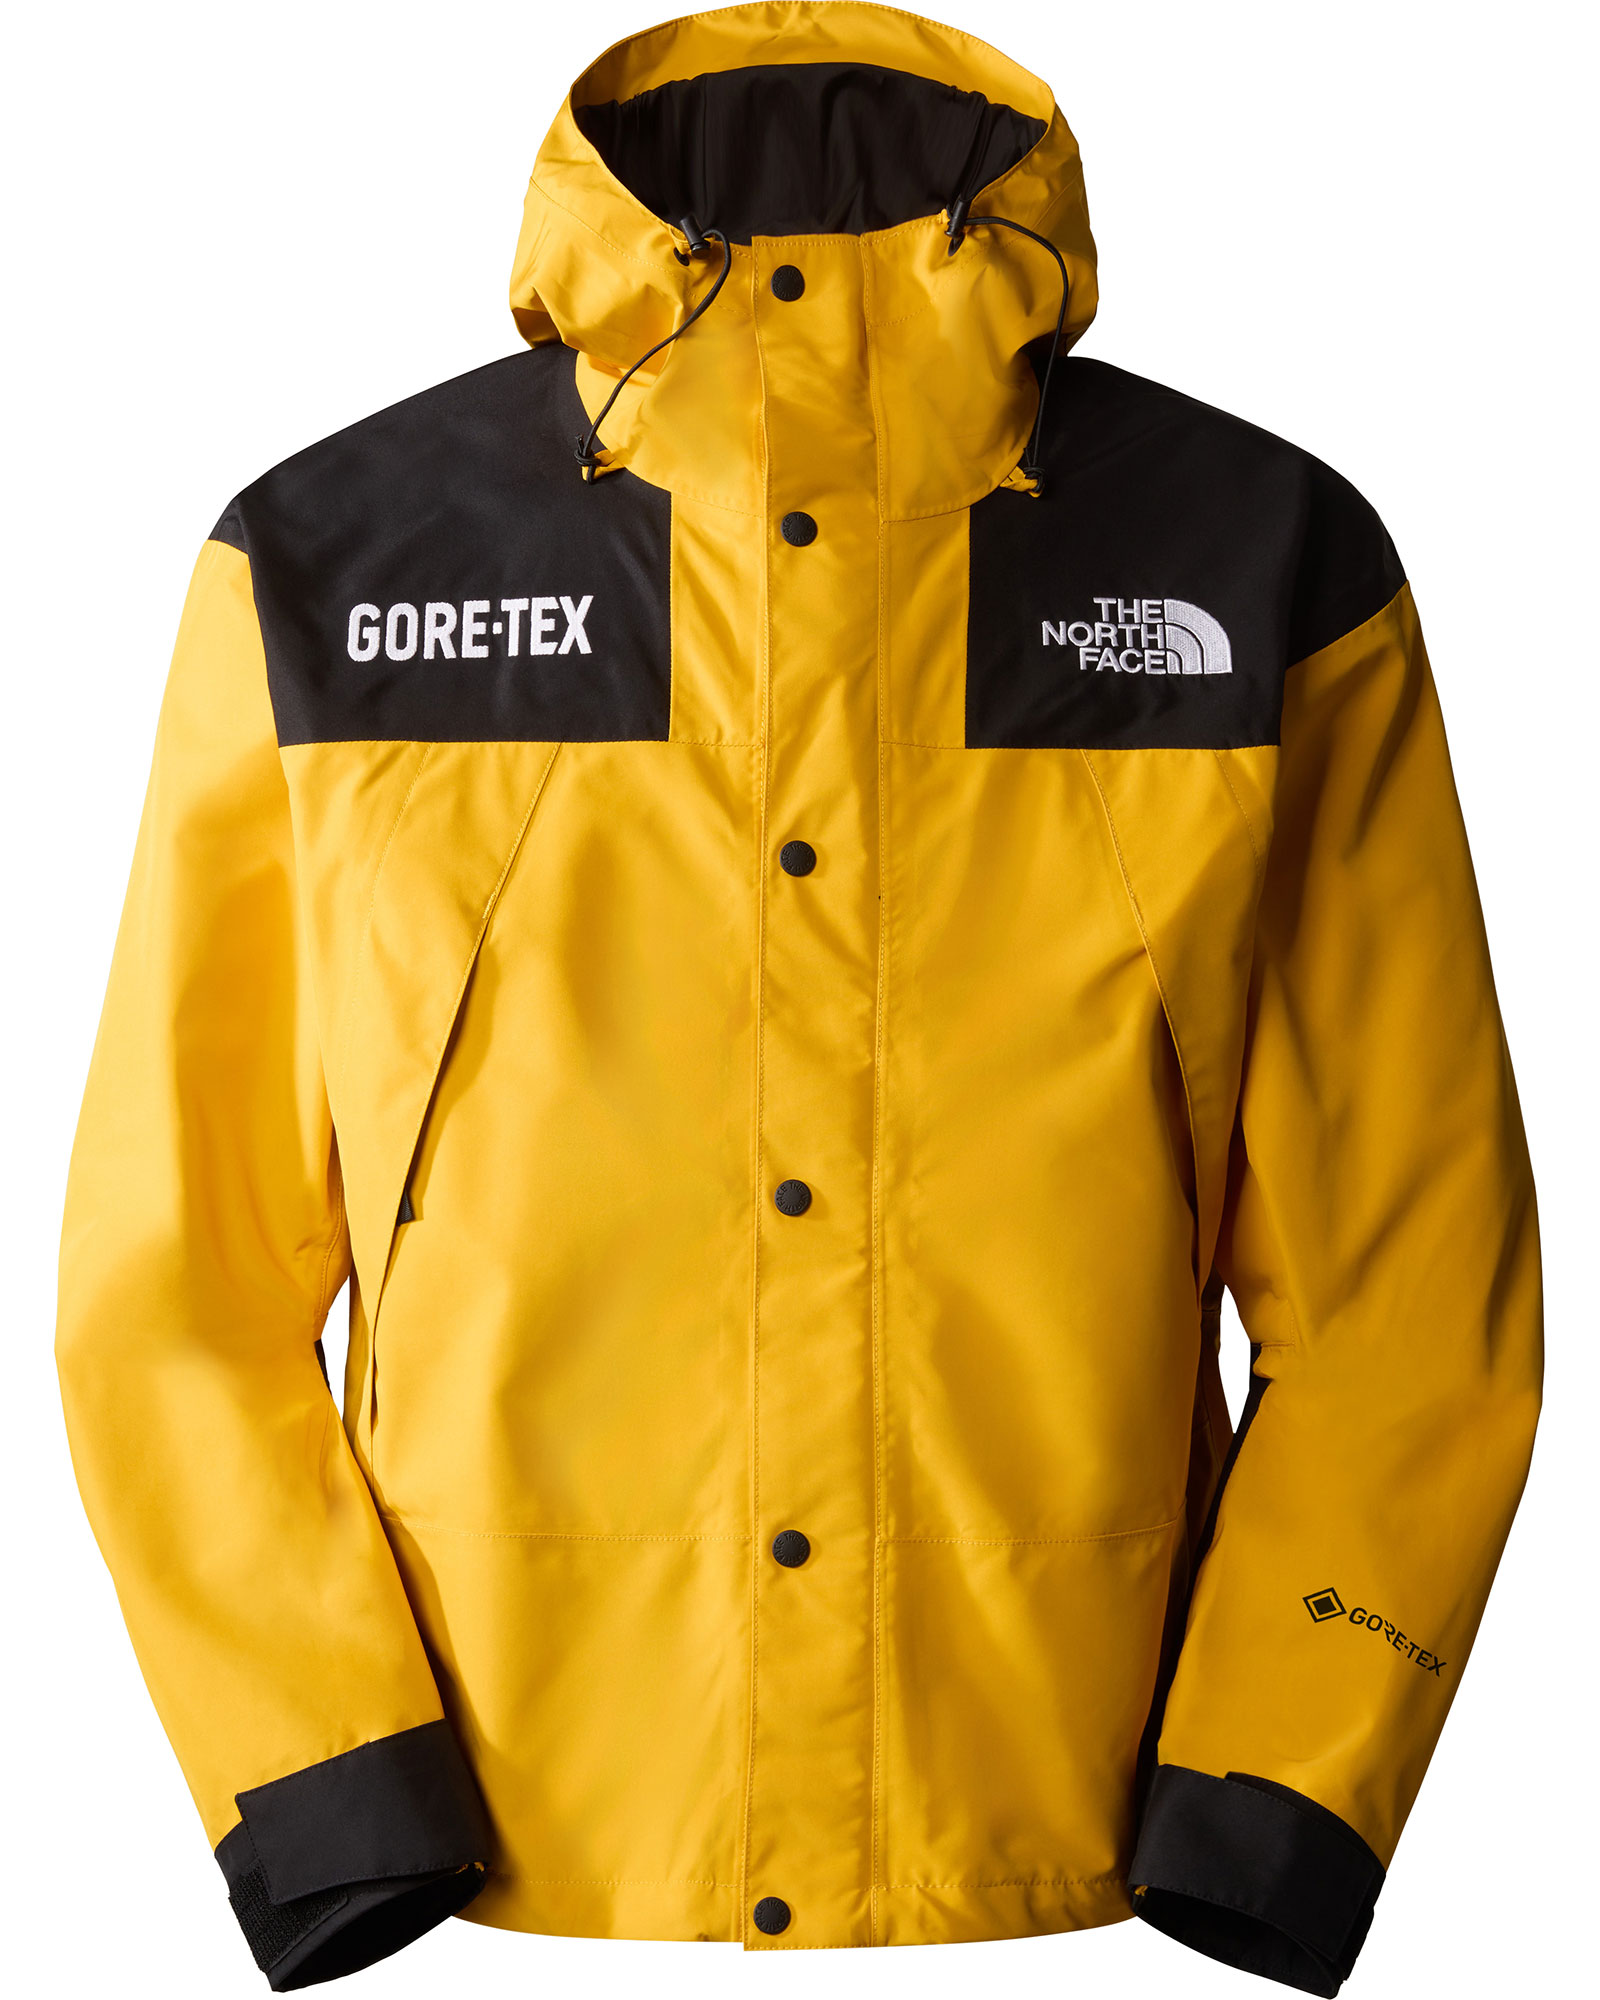 The North Face Men’s Mountain GORE TEX Jacket - Summit Gold-TNF Black M